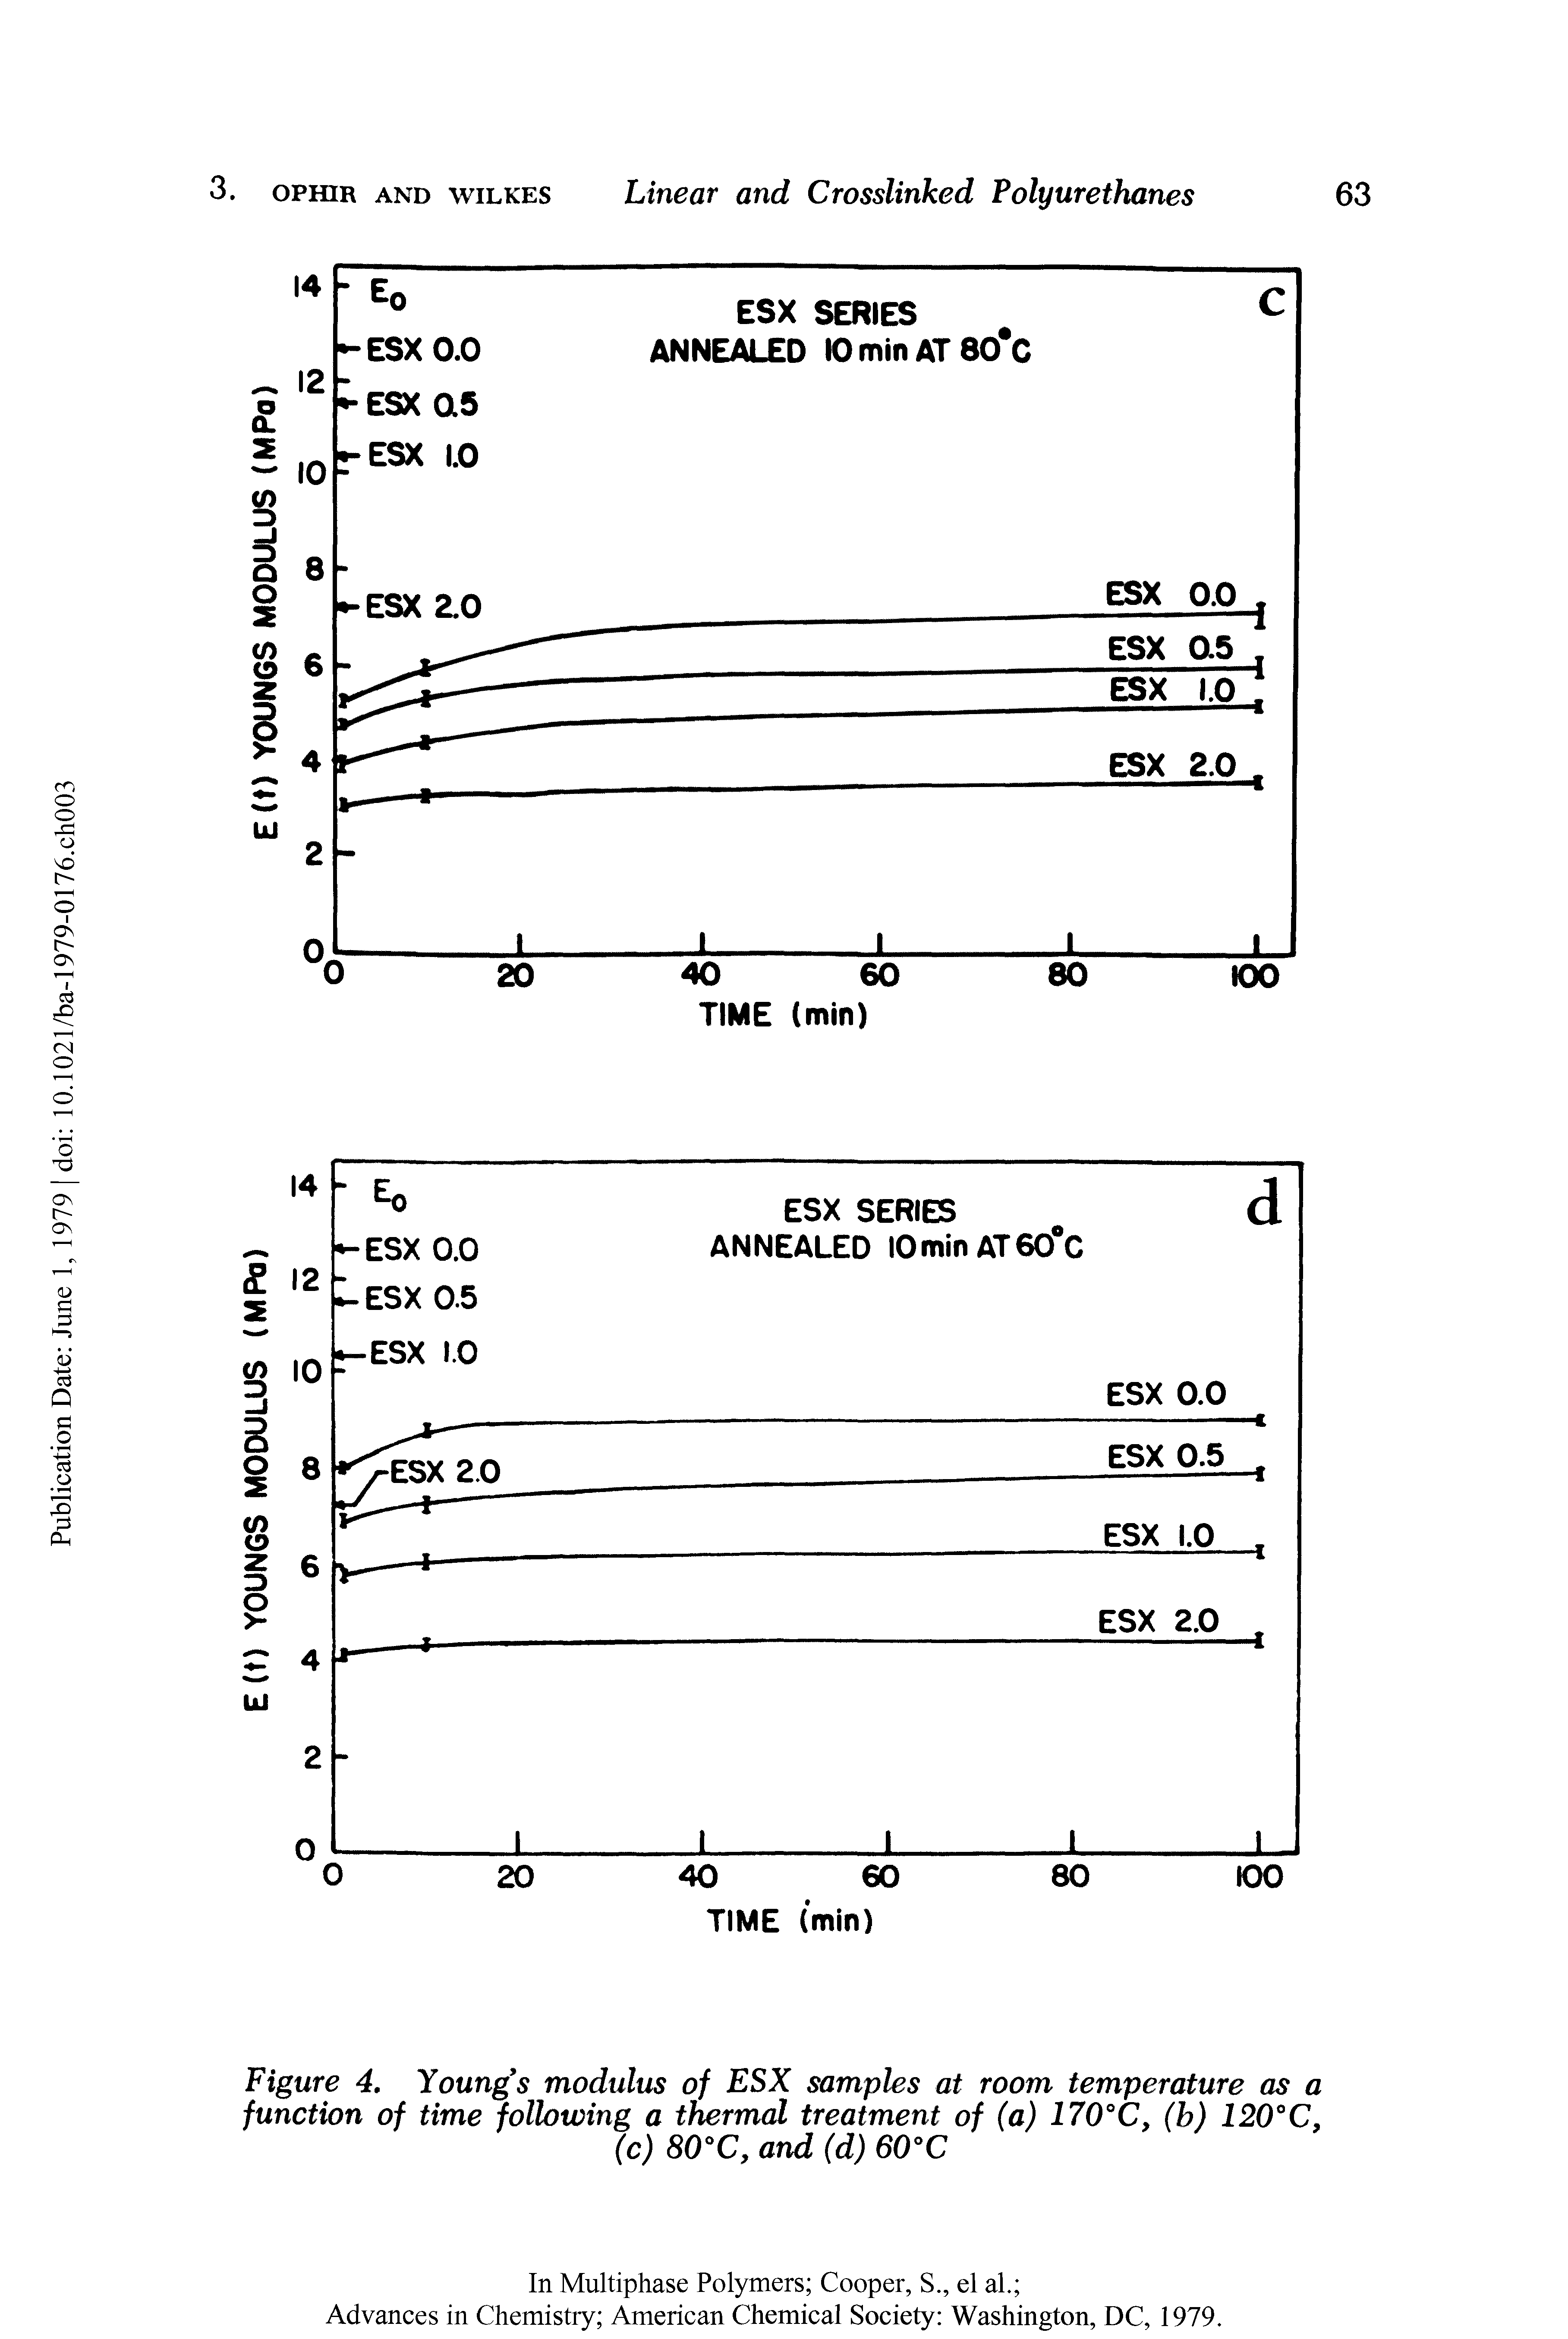 Figure 4. Youngs modulus of ESX samples at room temperature as a function of time following a thermal treatment of (a) 170°C, (b) 120°C, (c) 80°C, and (d) 60°C...